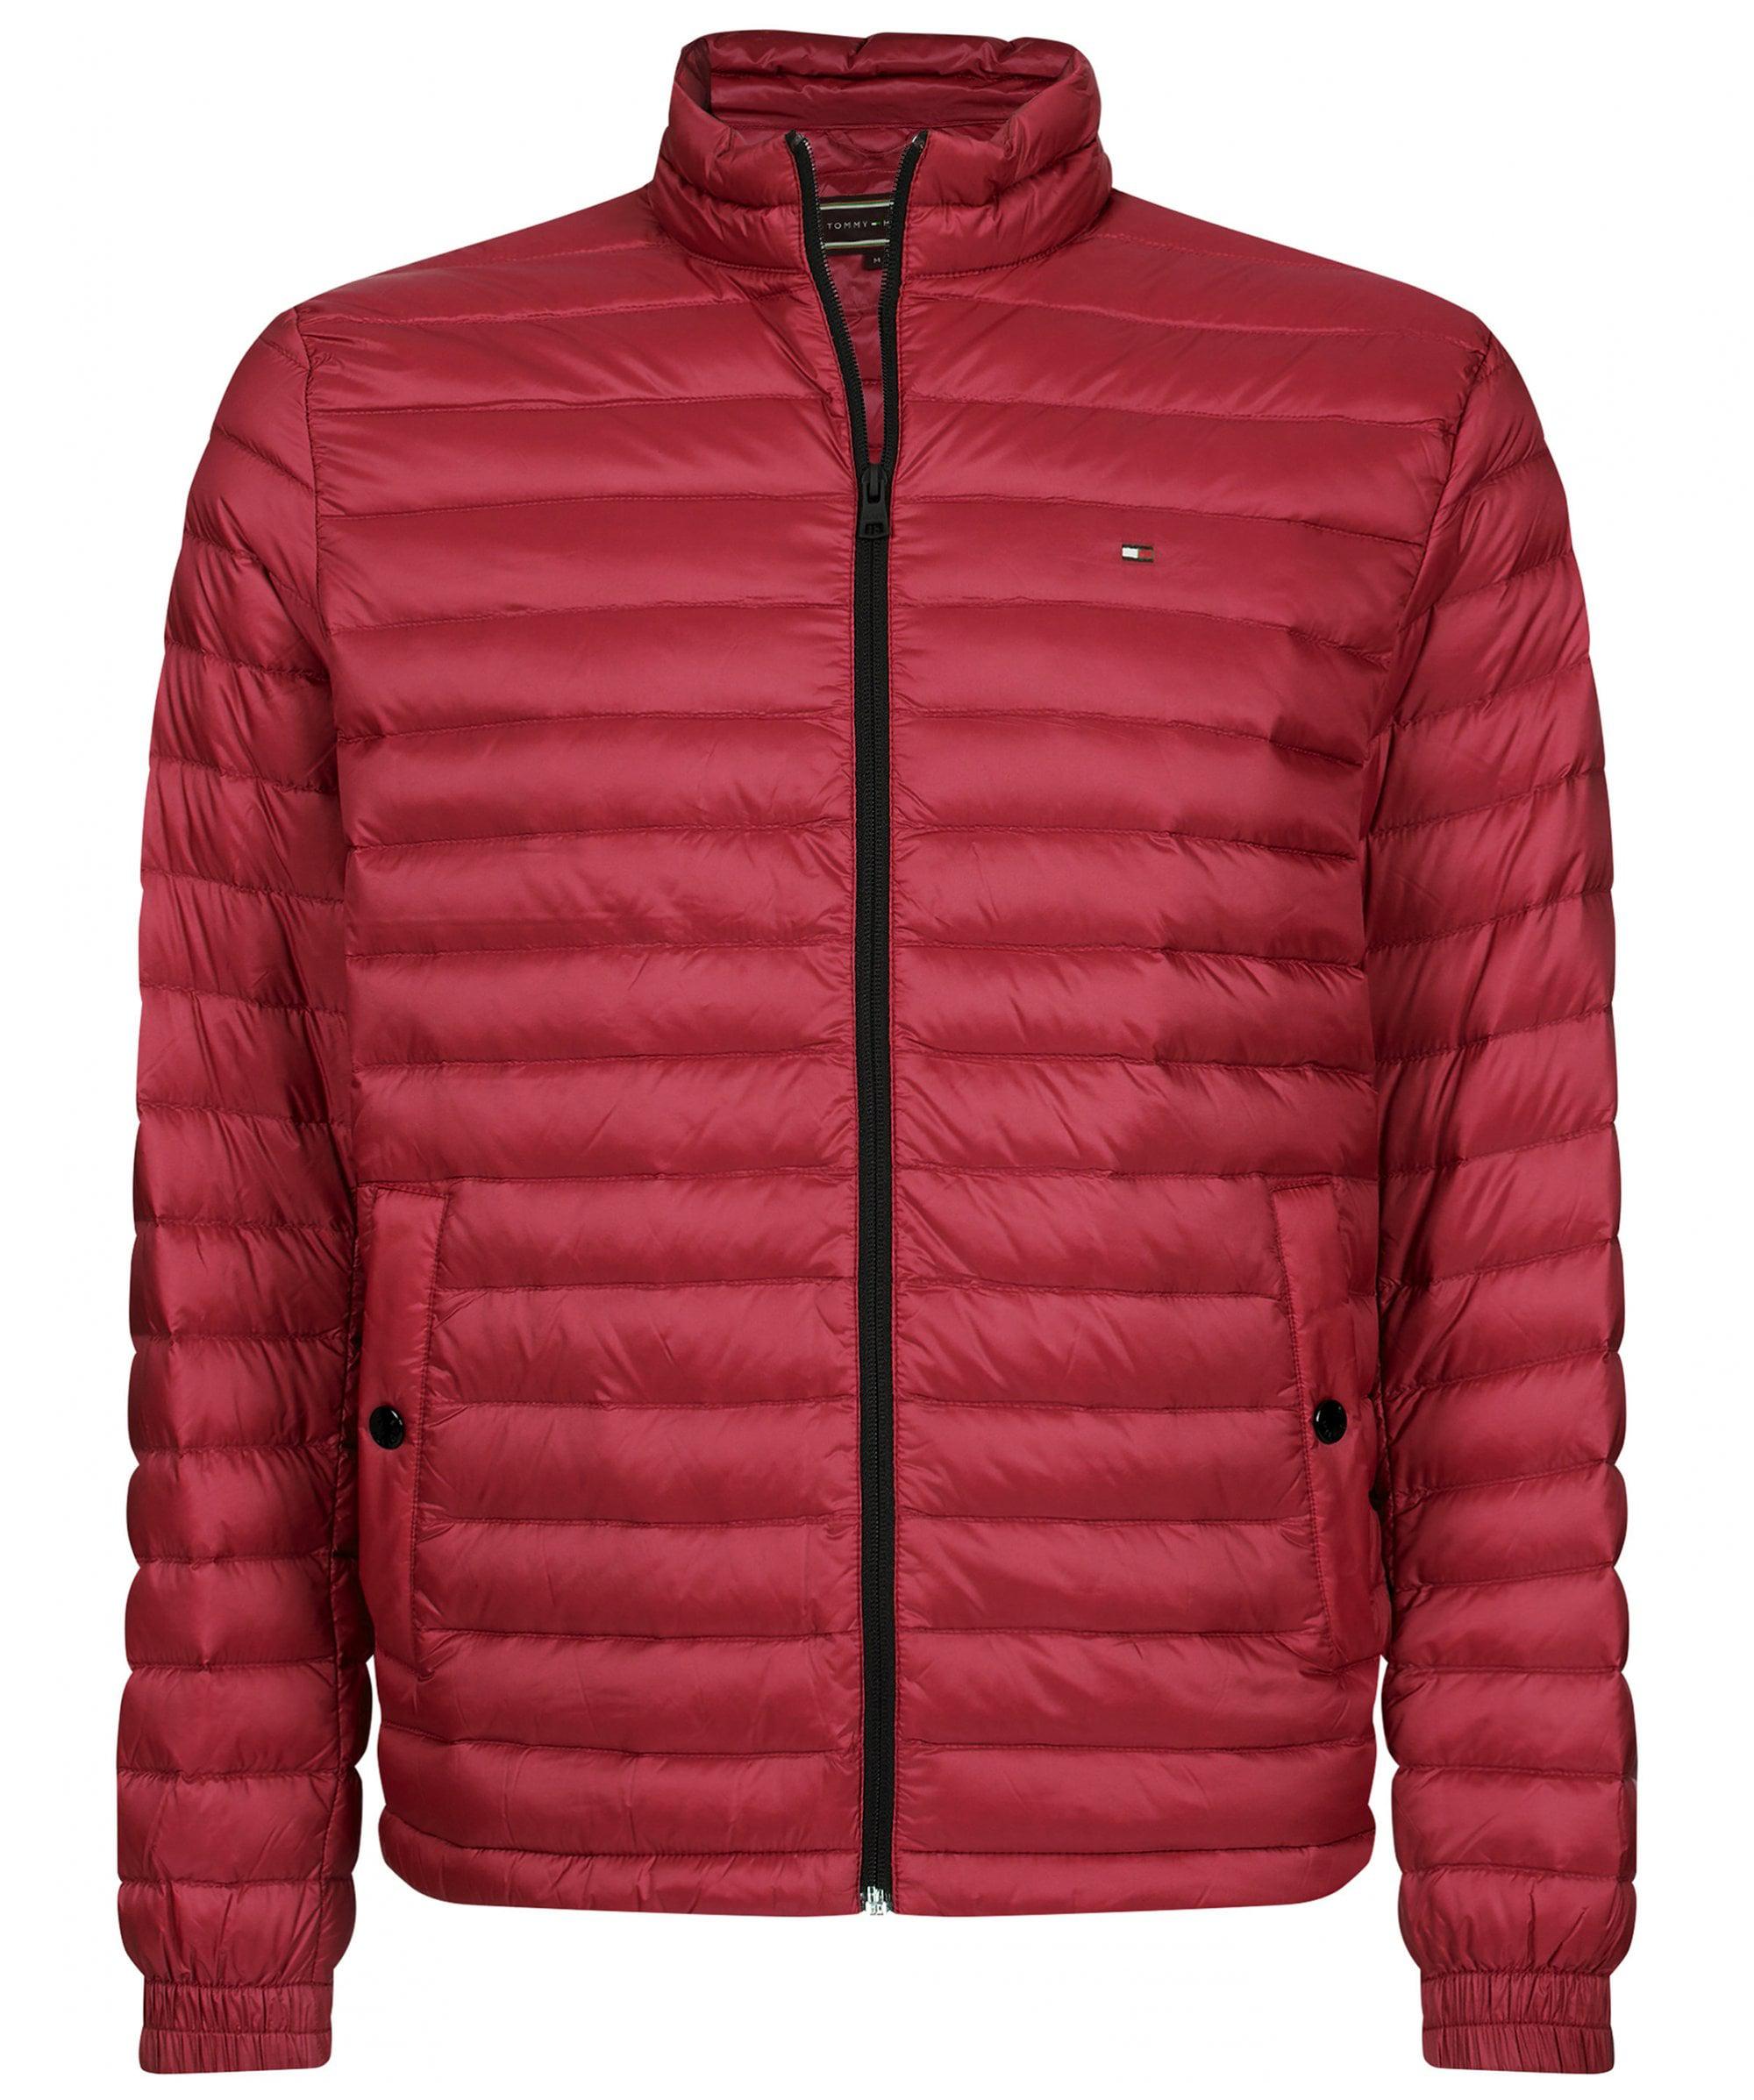 Tommy Hilfiger Lightweight Packable Down Jacket in Red for Men - Lyst